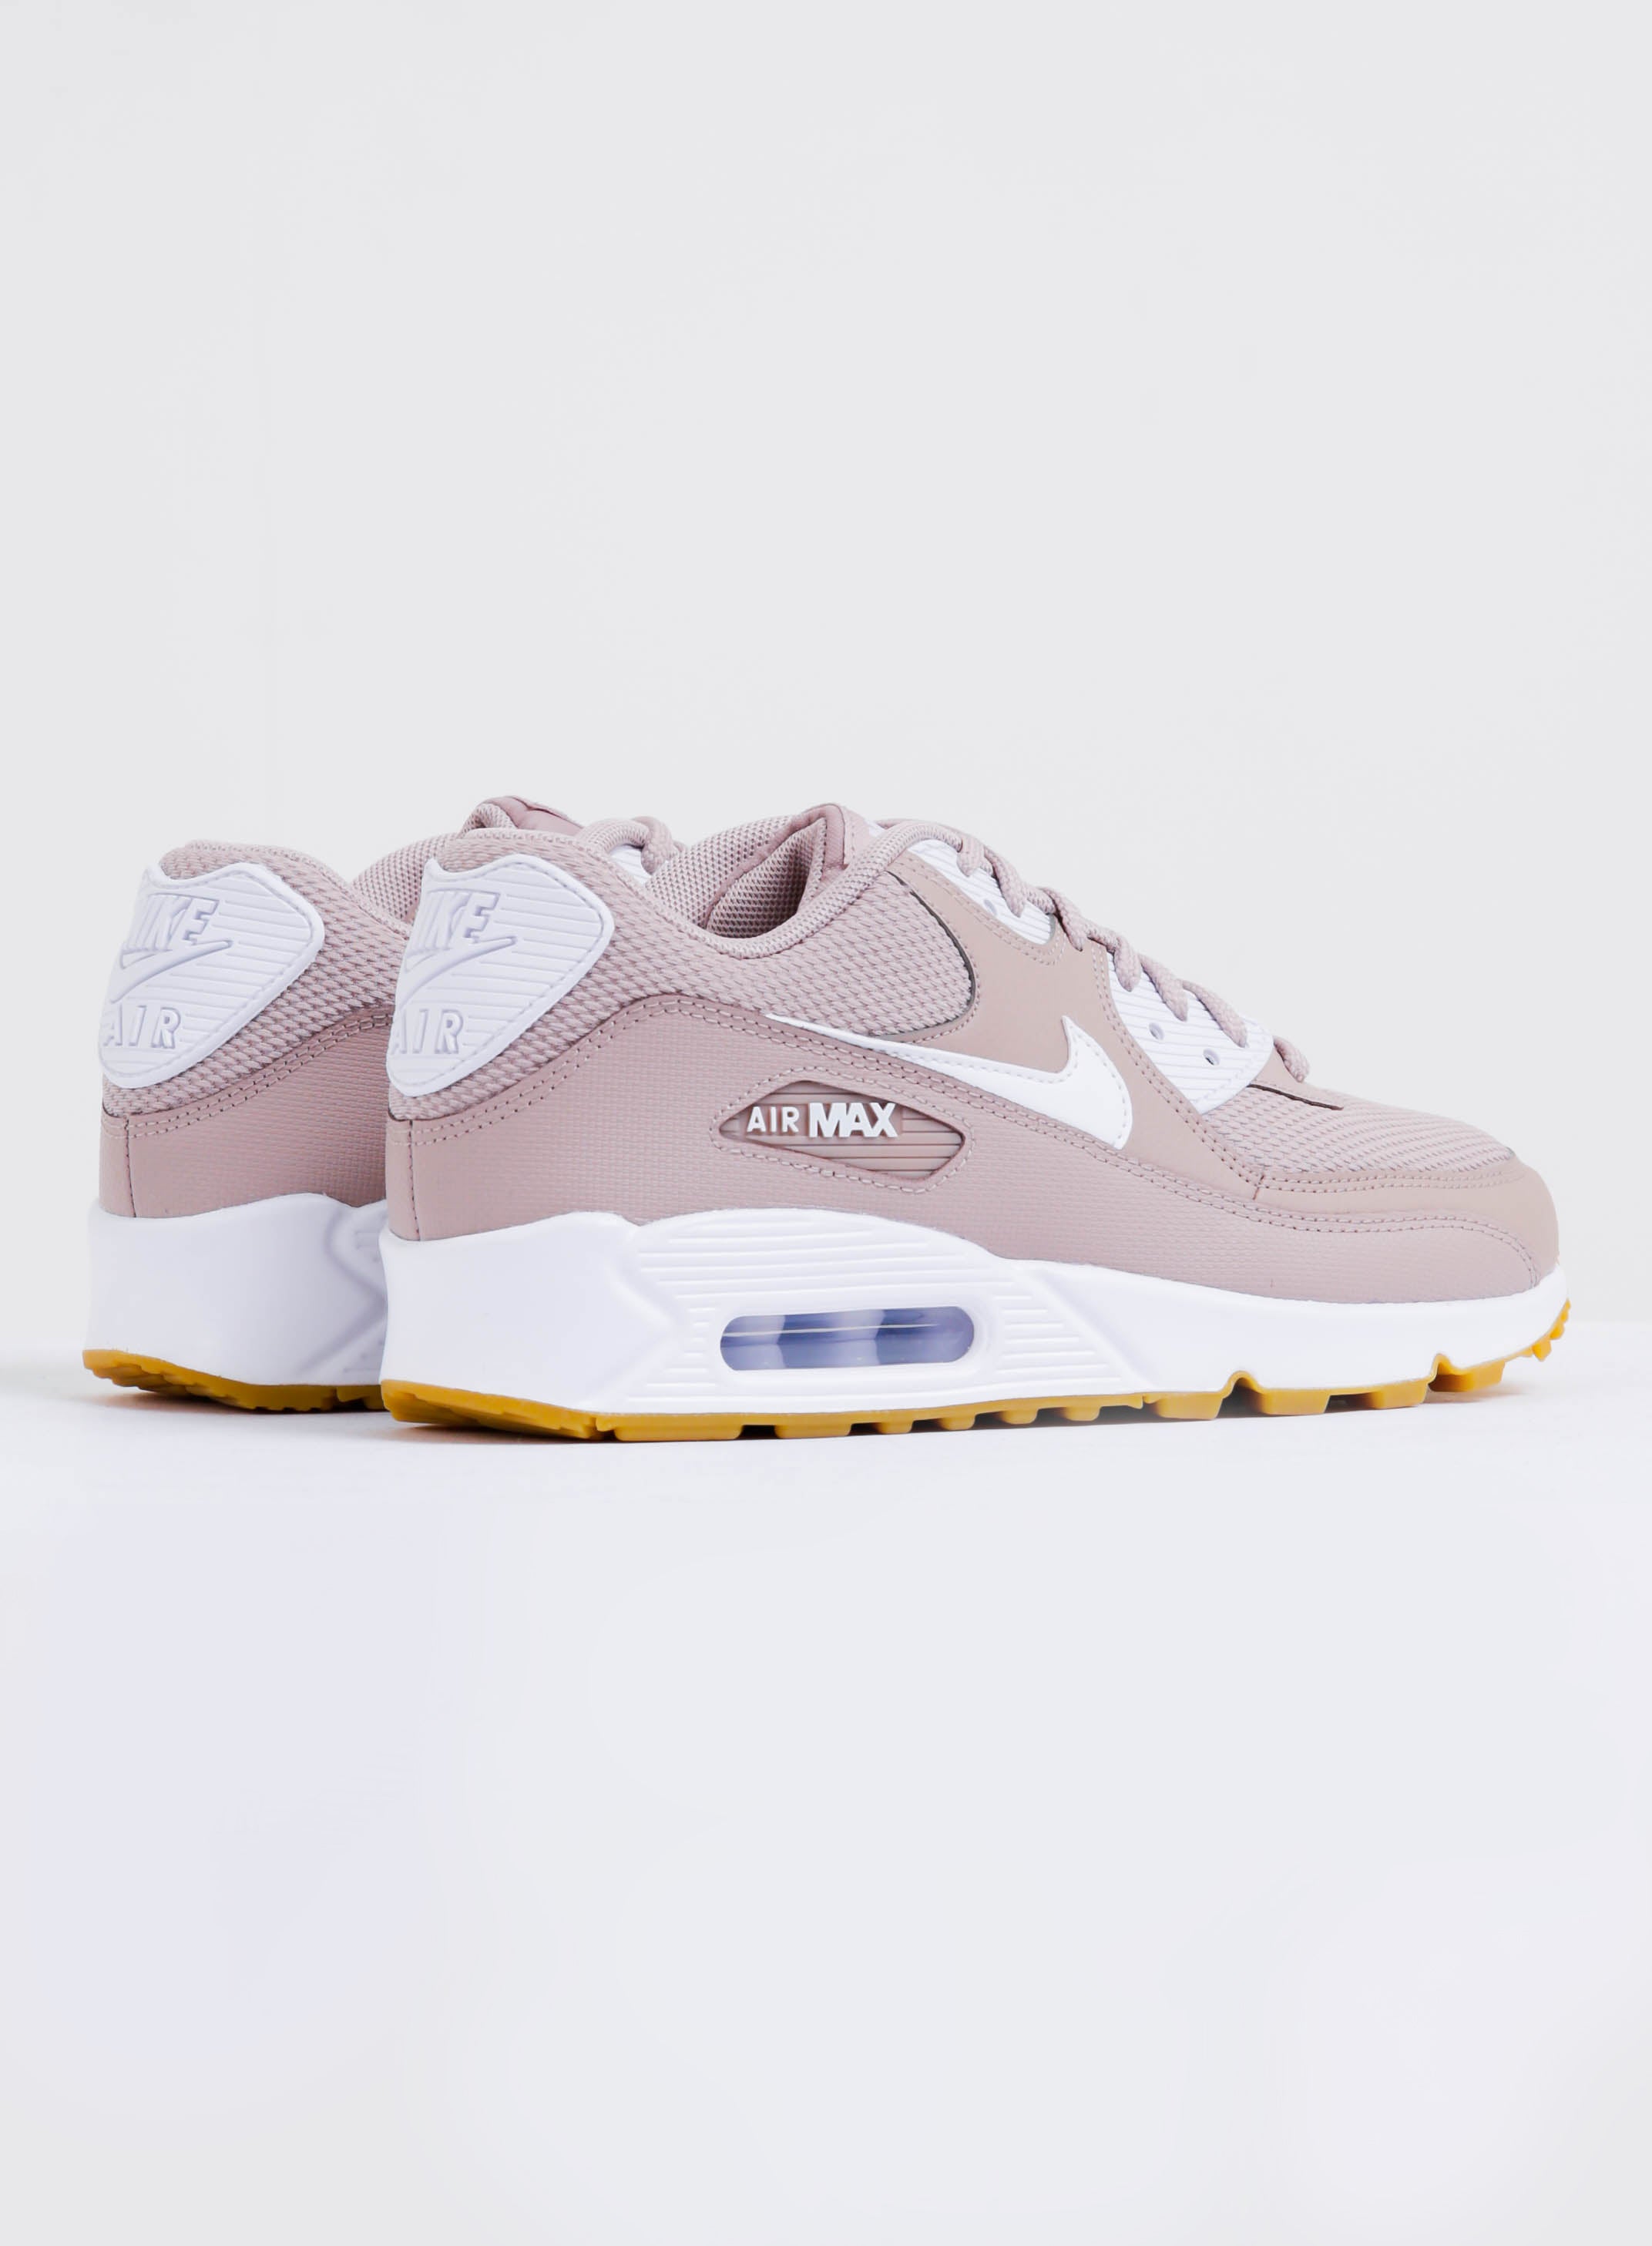 Womens Air Max 90 Sneakers in Taupe & White